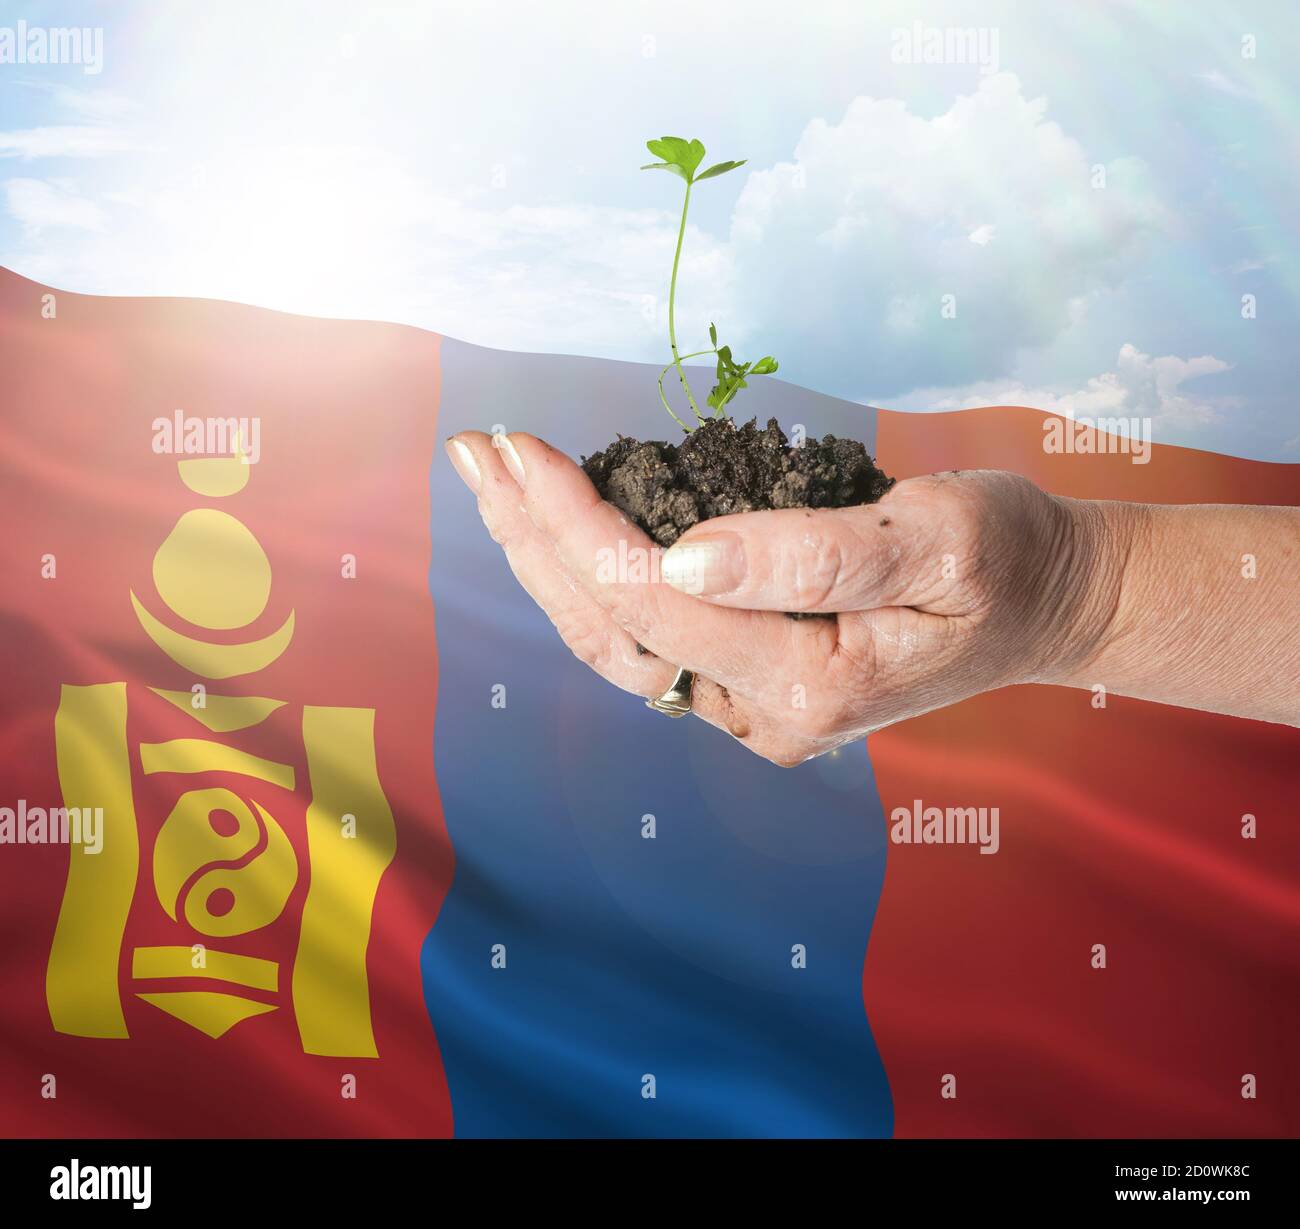 Mongolia growth and new beginning. Green renewable energy and ecology concept. Hand holding young plant. Stock Photo